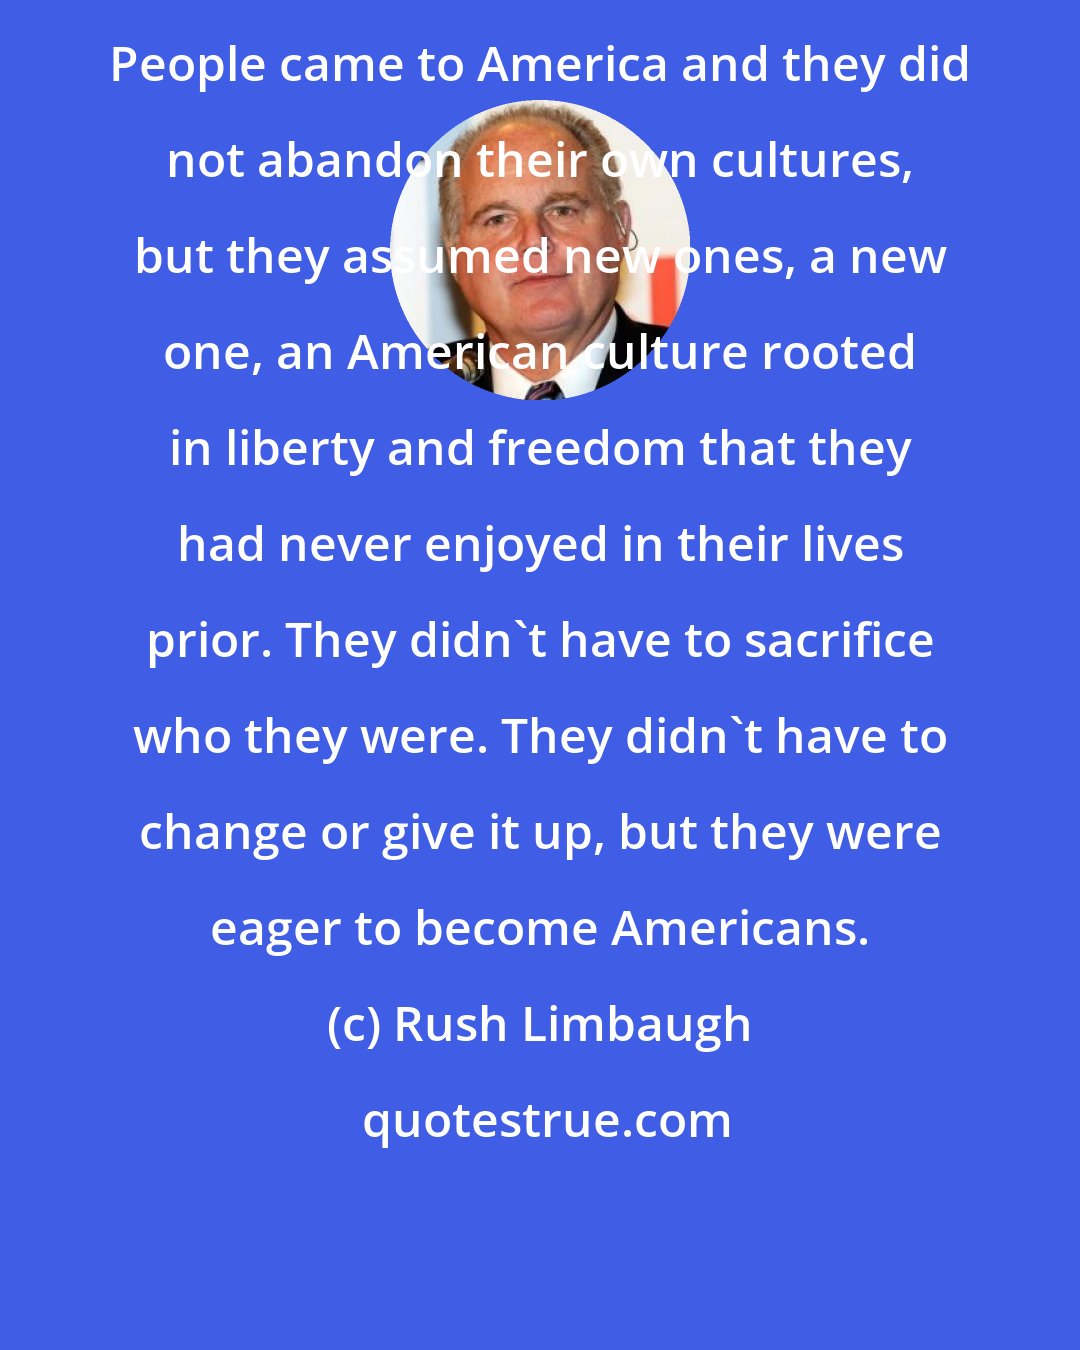 Rush Limbaugh: People came to America and they did not abandon their own cultures, but they assumed new ones, a new one, an American culture rooted in liberty and freedom that they had never enjoyed in their lives prior. They didn't have to sacrifice who they were. They didn't have to change or give it up, but they were eager to become Americans.